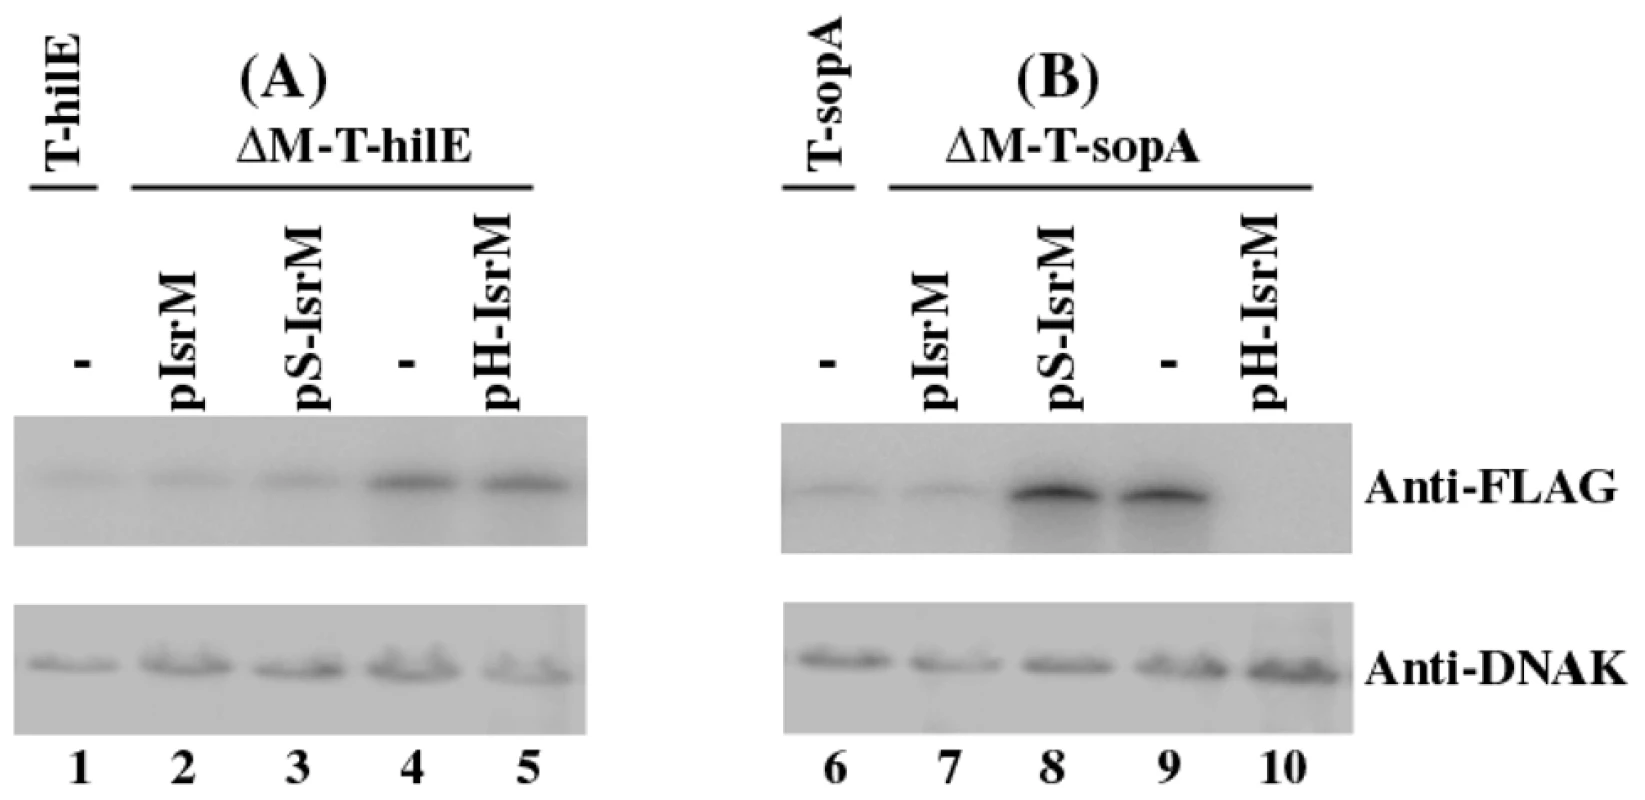 Western blot analysis of the expression of the tagged proteins from <i>Salmonella</i>.